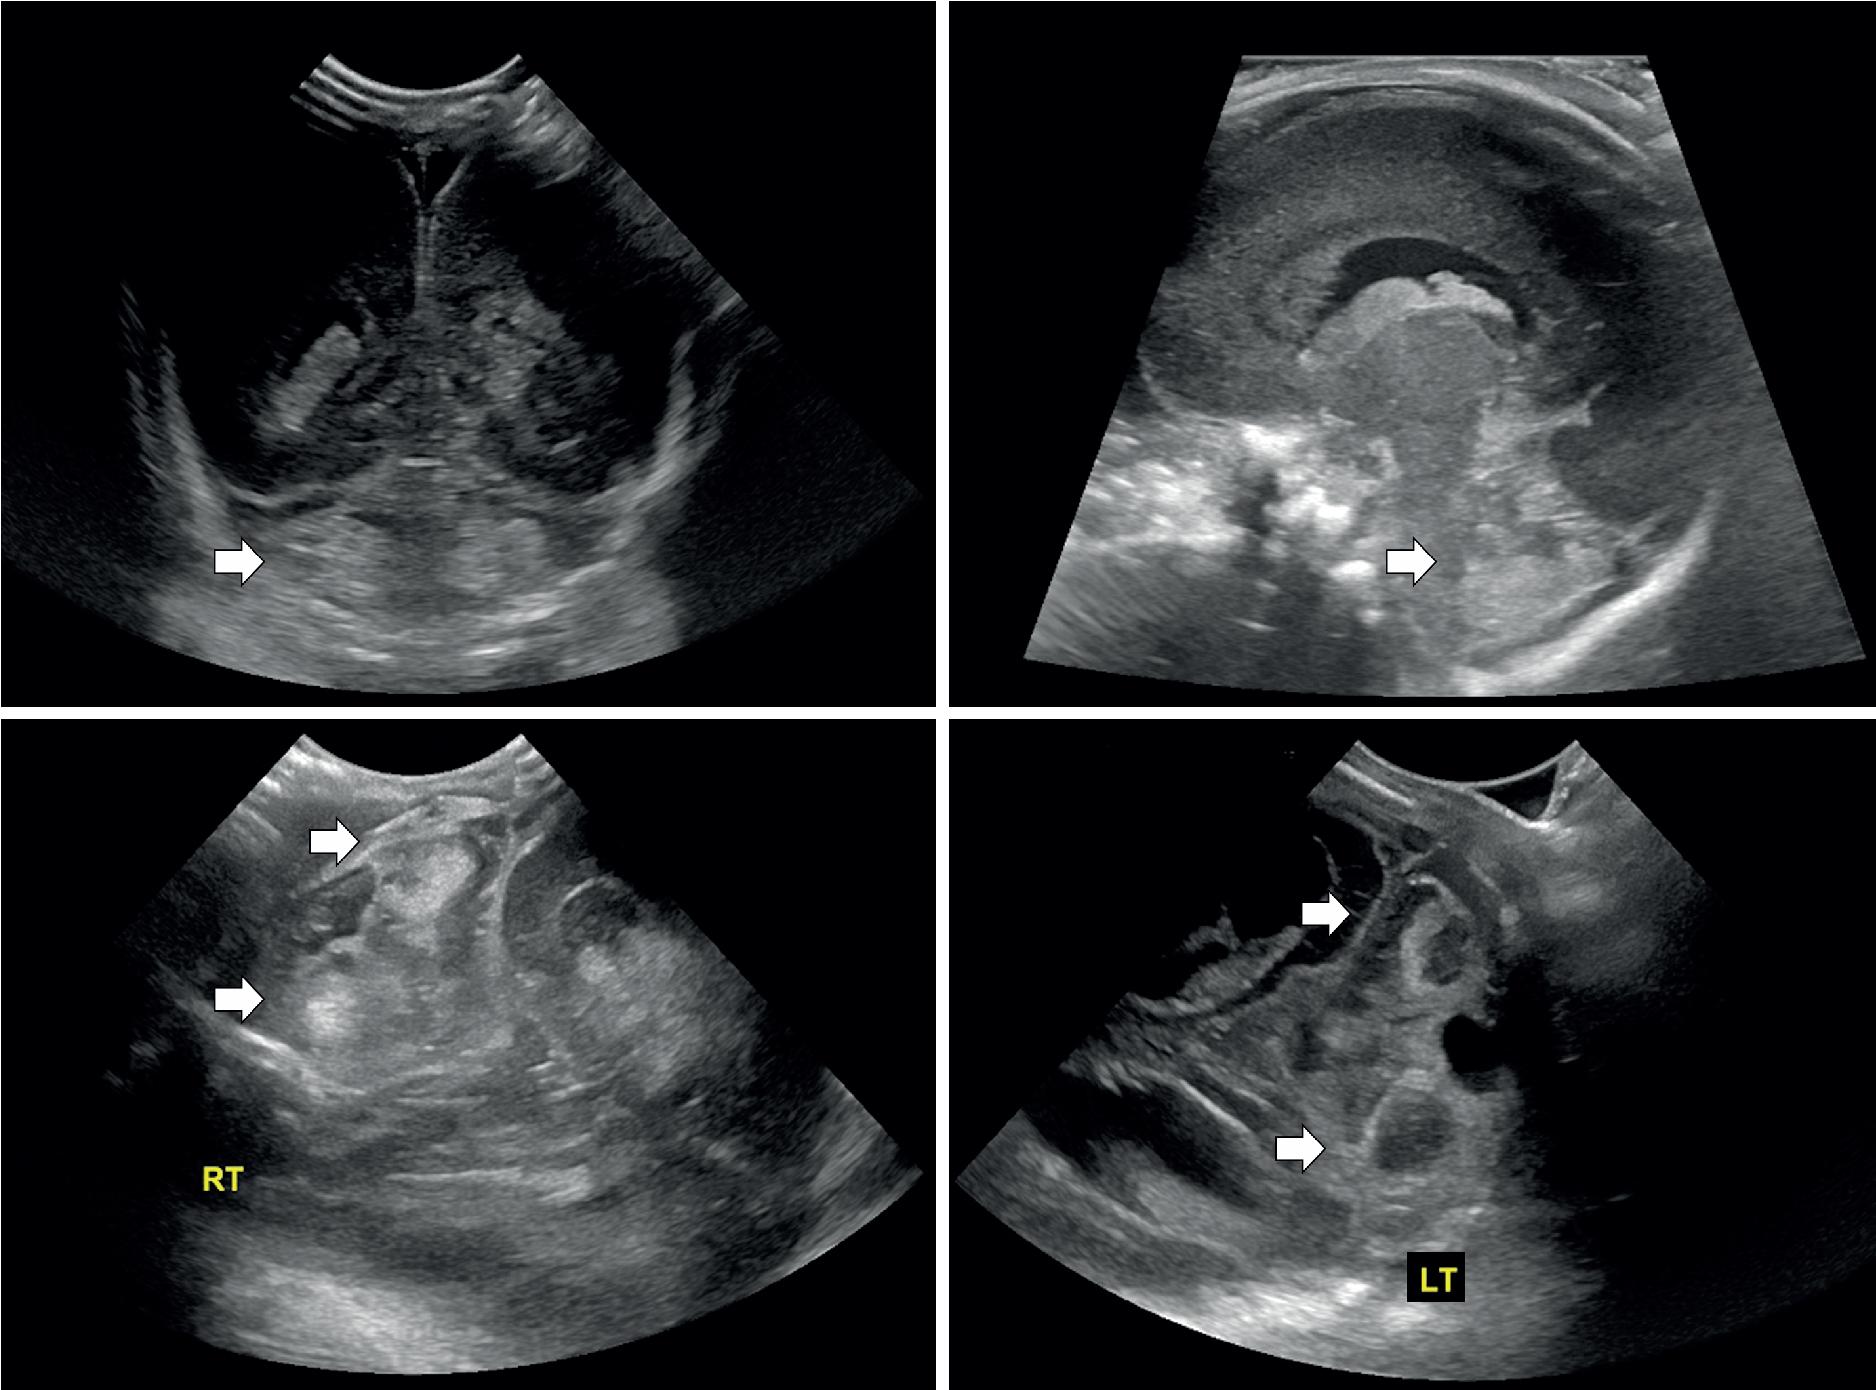 Fig. 5.1, Ultrasound images over time of the 24-week preterm male depicted in the case study. Upper left panel: Coronal image on day of life (DOL) 3 via the anterior fontanel demonstrating bilateral intraventricular hemorrhage within the posterior horns of the lateral ventricles with left periventricular hemorrhagic infarction and bilateral cerebellar hemisphere echogenicities suspicious for hemorrhage ( arrowhead ). Upper right panel: Sagittal right image on DOL 3 via the anterior fontanel demonstrating echogenicity within the inferior portion of the cerebellar hemisphere ( arrowhead ). Bottom left panel: Ultrasound image on DOL 6 via the left mastoid fontanel demonstrating echogenicities within both cerebellar hemispheres suggestive of cerebellar hemorrhage ( arrowheads ). Ultrasound image on DOL 19 via the left mastoid fontanel demonstrating lesions with echogenic rims in both cerebellar hemispheres, likely representing the subacute phase of the cerebellar hemorrhages ( arrowheads ).